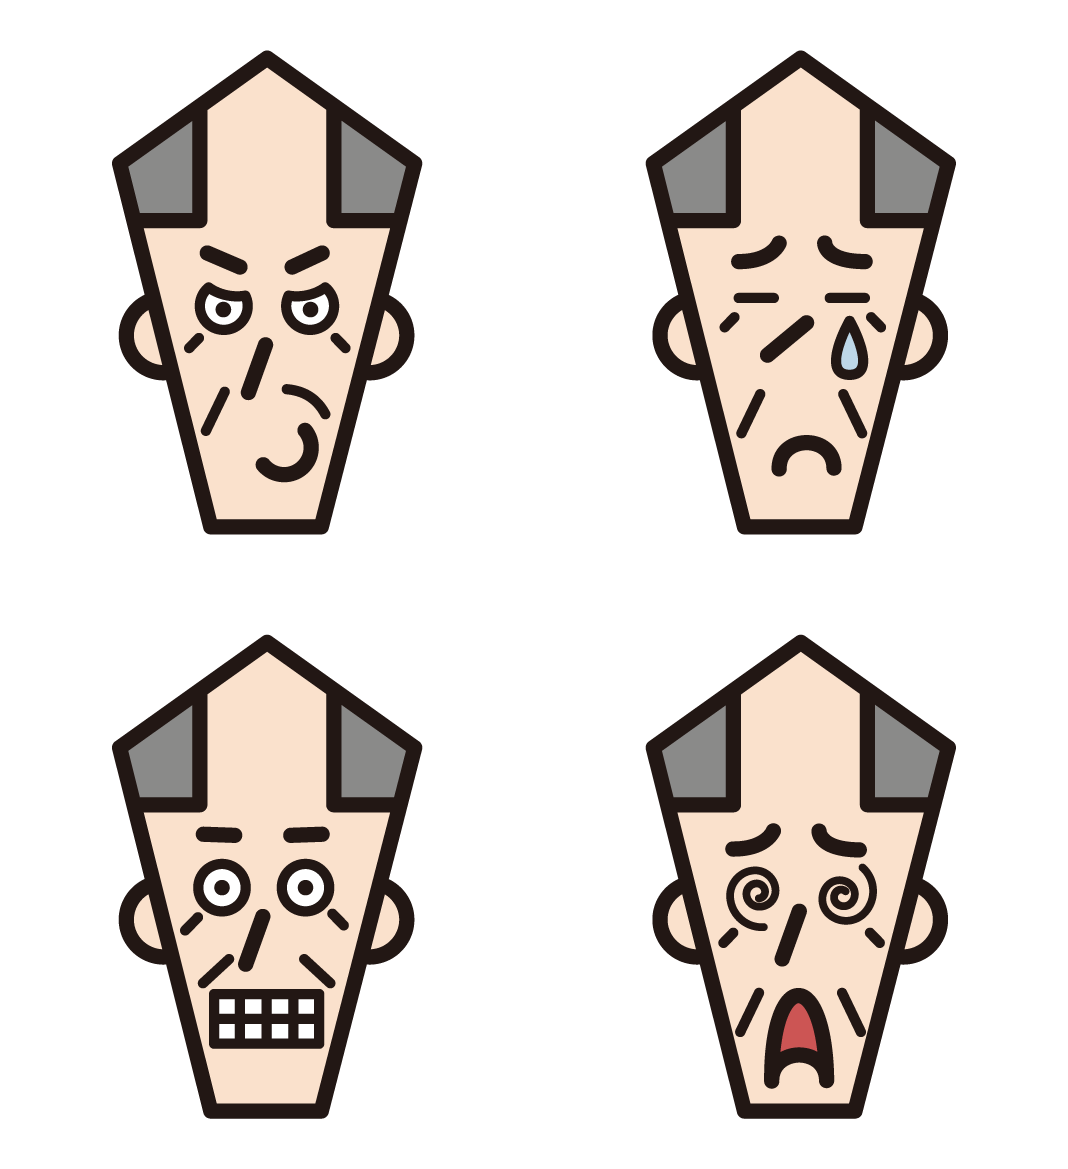 3 illustrations of the various facial expressions (thinning hair) of the grandfather